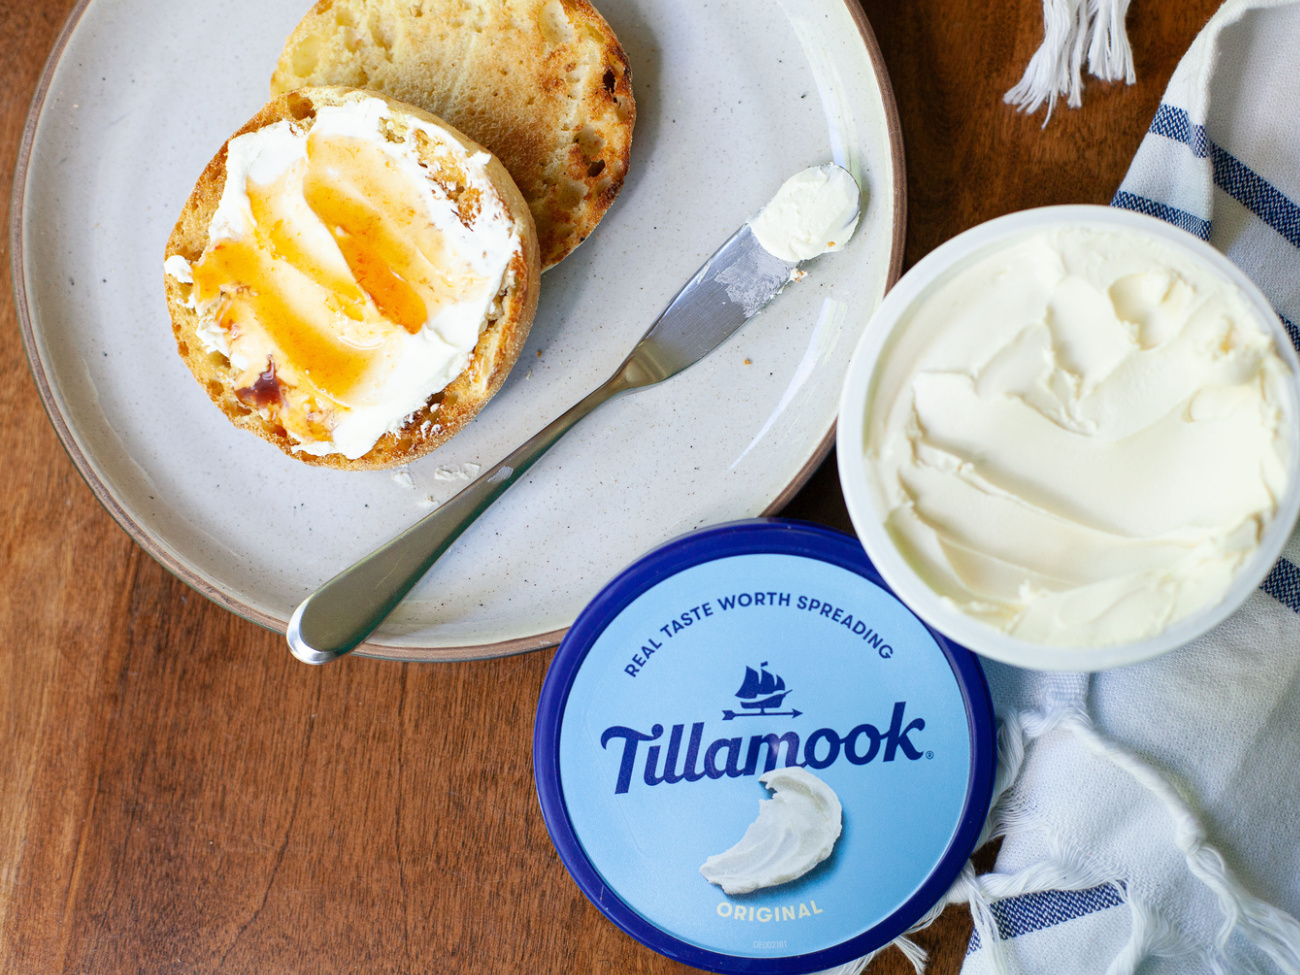 Get A $5 Publix Gift Card When You Bring Home Delicious Tillamook Products! on I Heart Publix